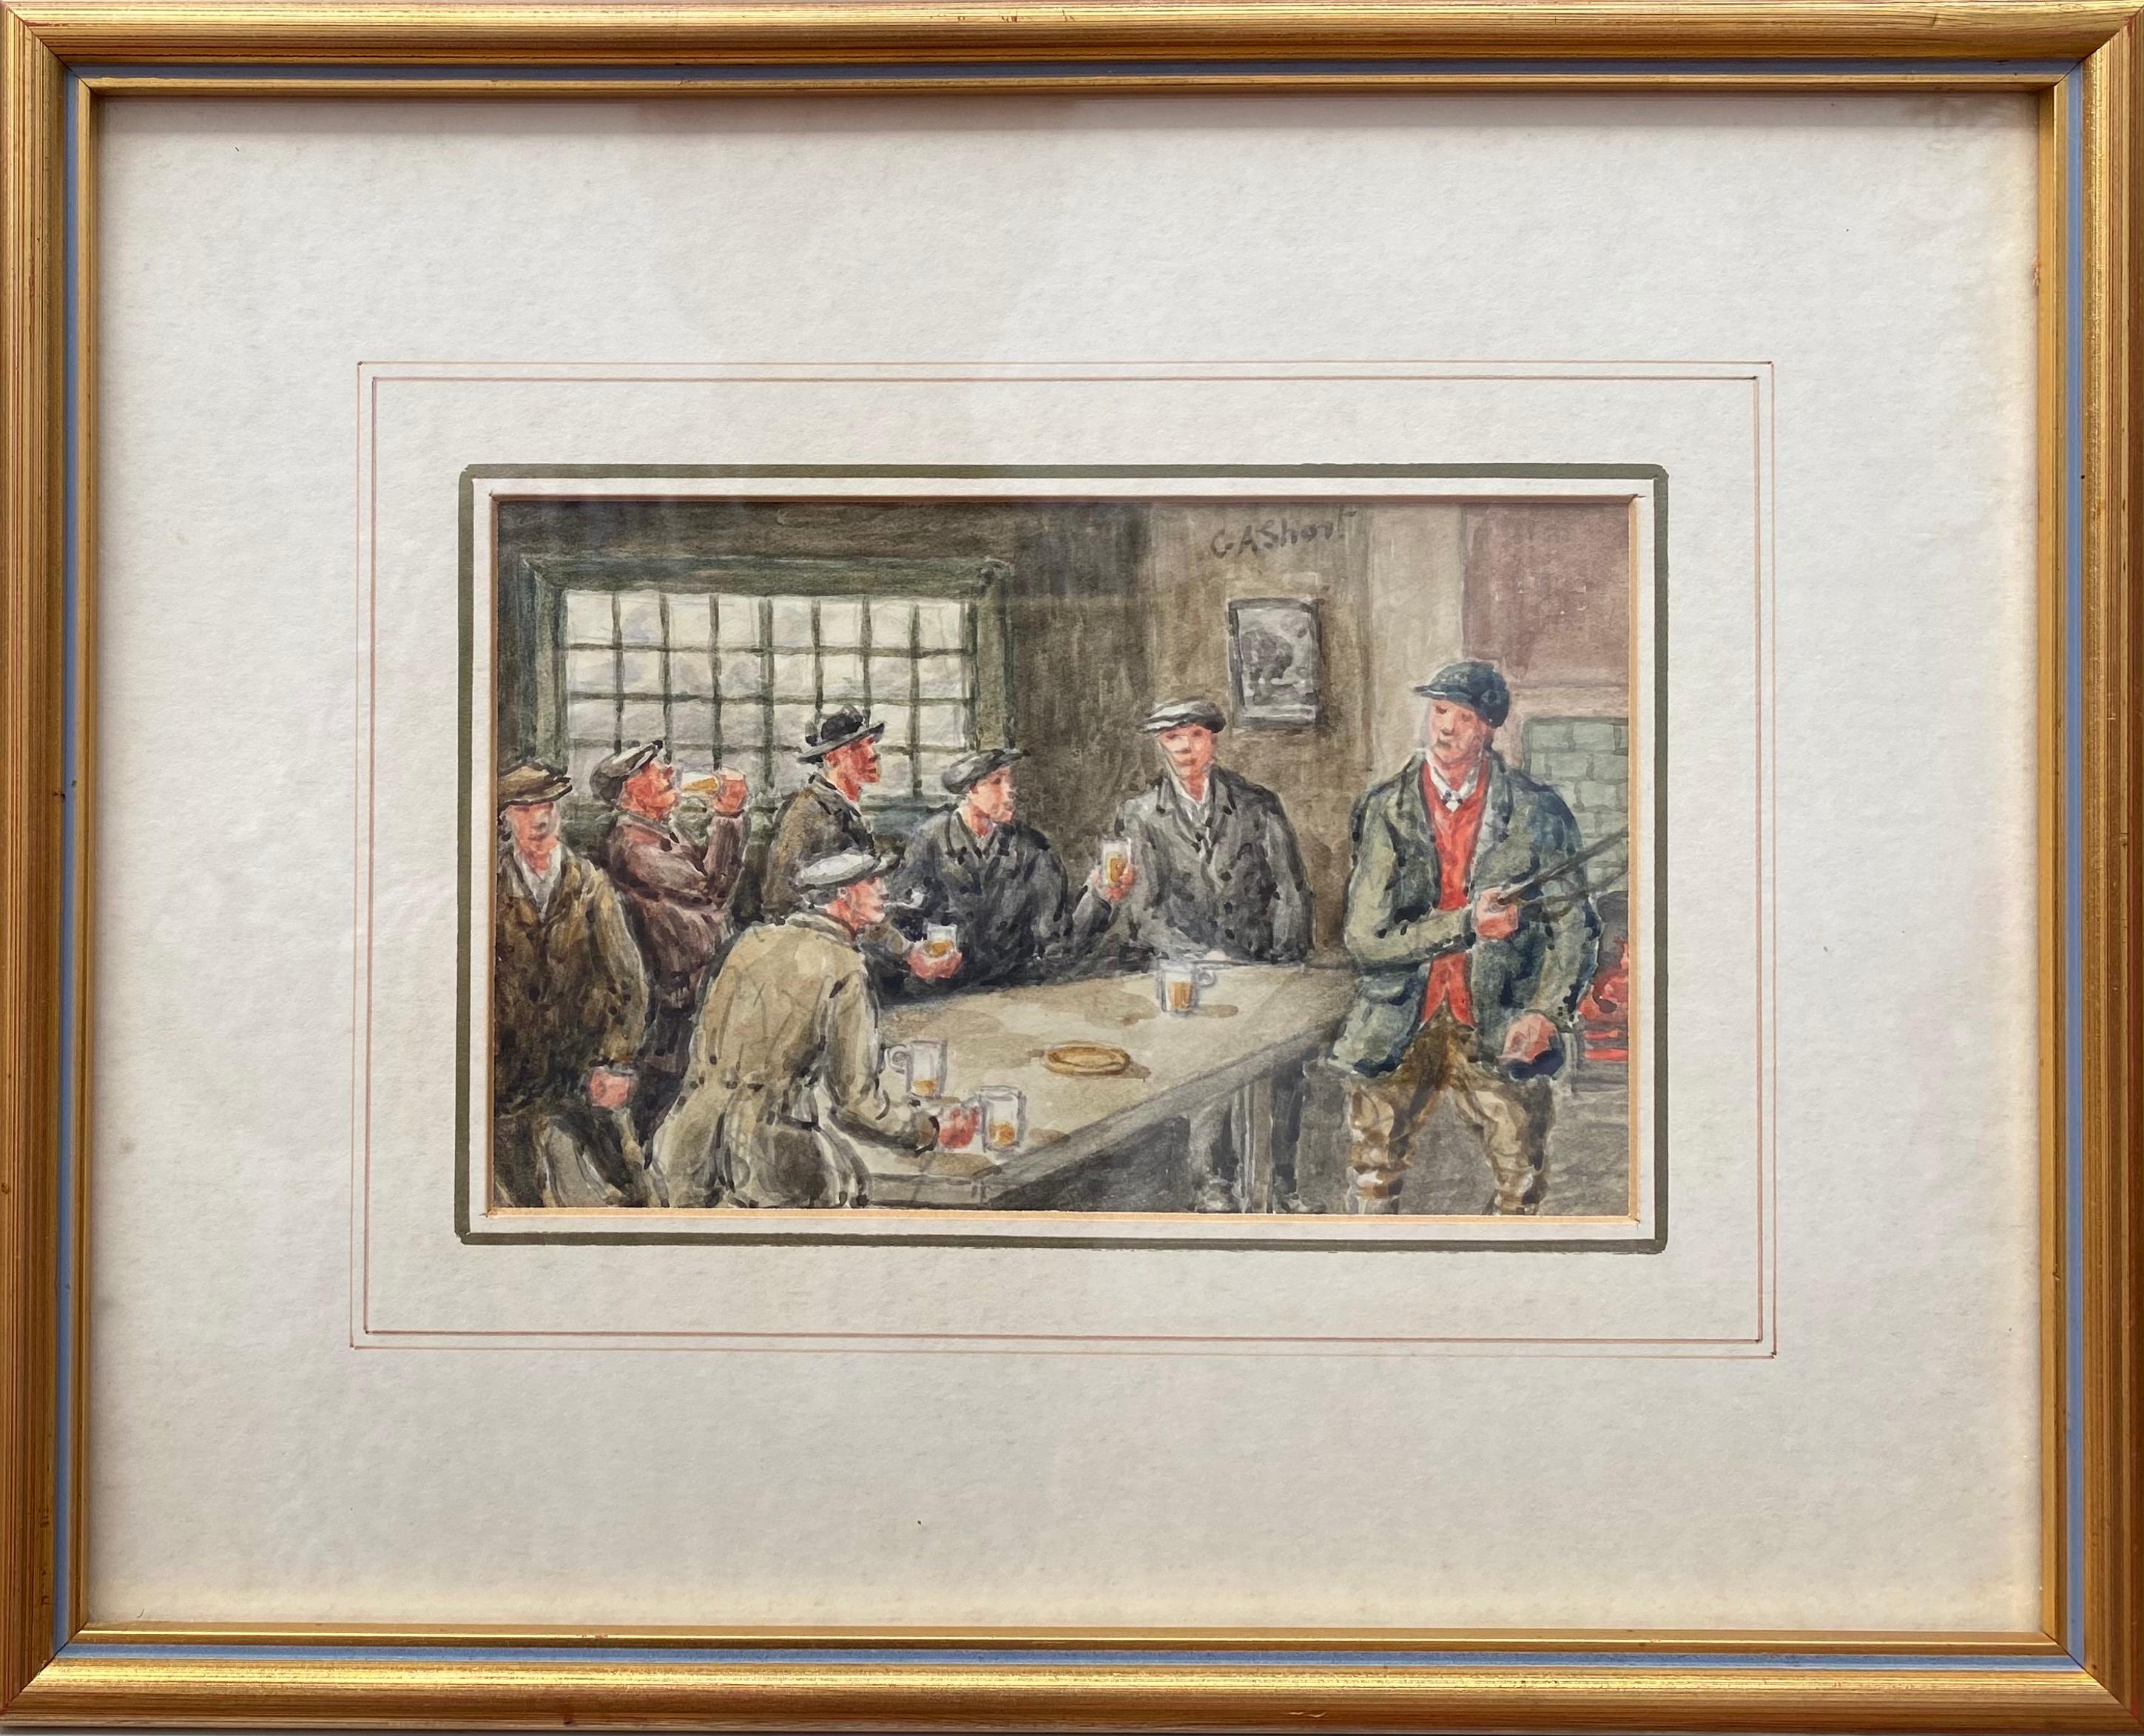 Original watercolor with graphite tracings of interior crowded pub scene by the British artist, George Anderson Short. Signed top right.  Circa 1940.  Overall cream mat and thin gold leaf frame 10.25 by 12.75 inches in fine condition.  Provenance: 